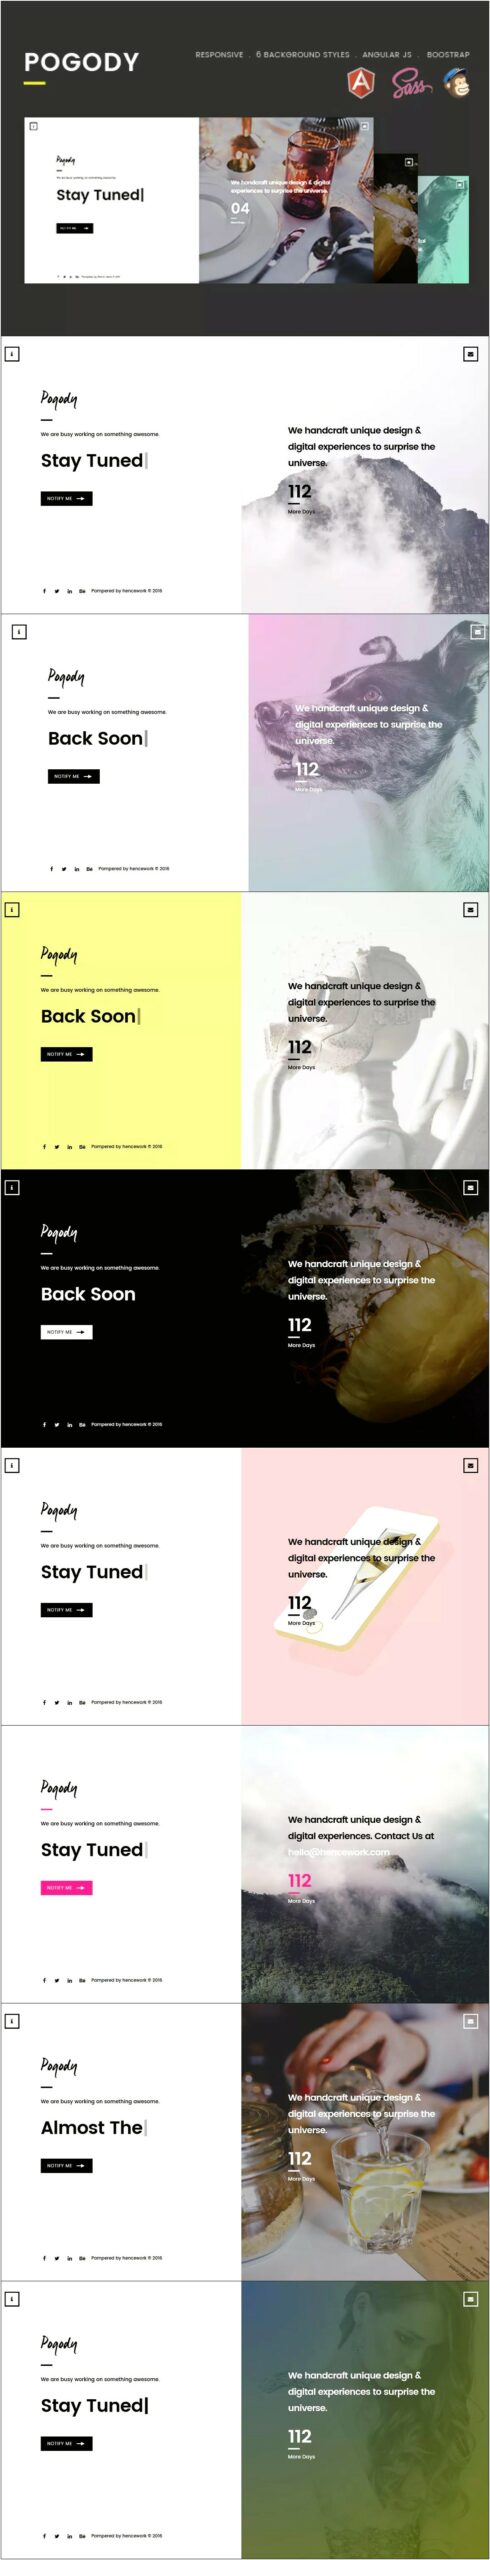 Pogody Responsive Html5 Coming Soon Template Free Download